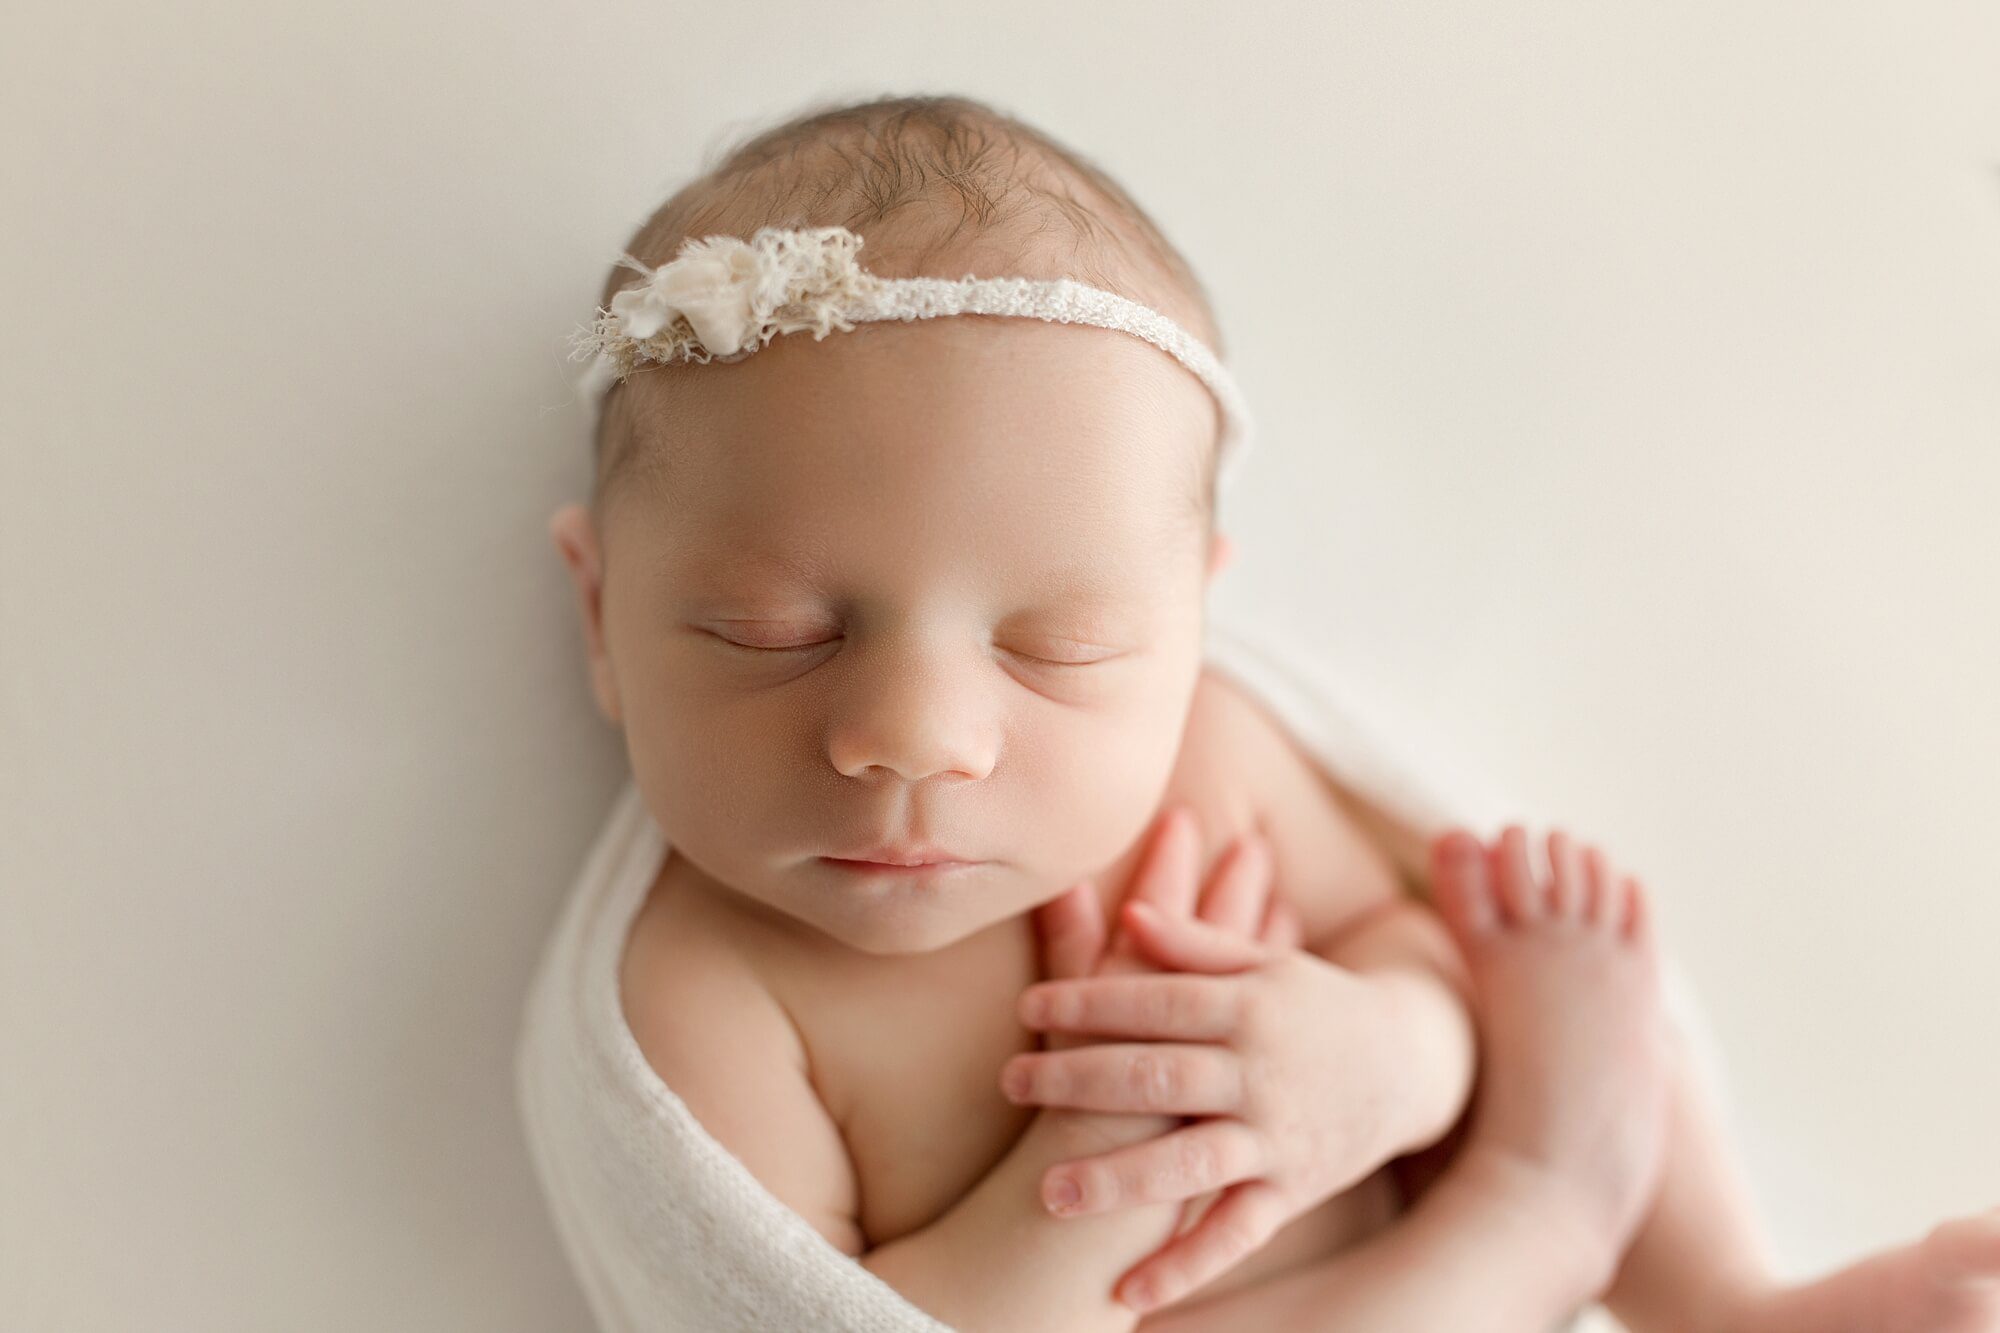 newborn baby photographer Puyallup | girl posed session